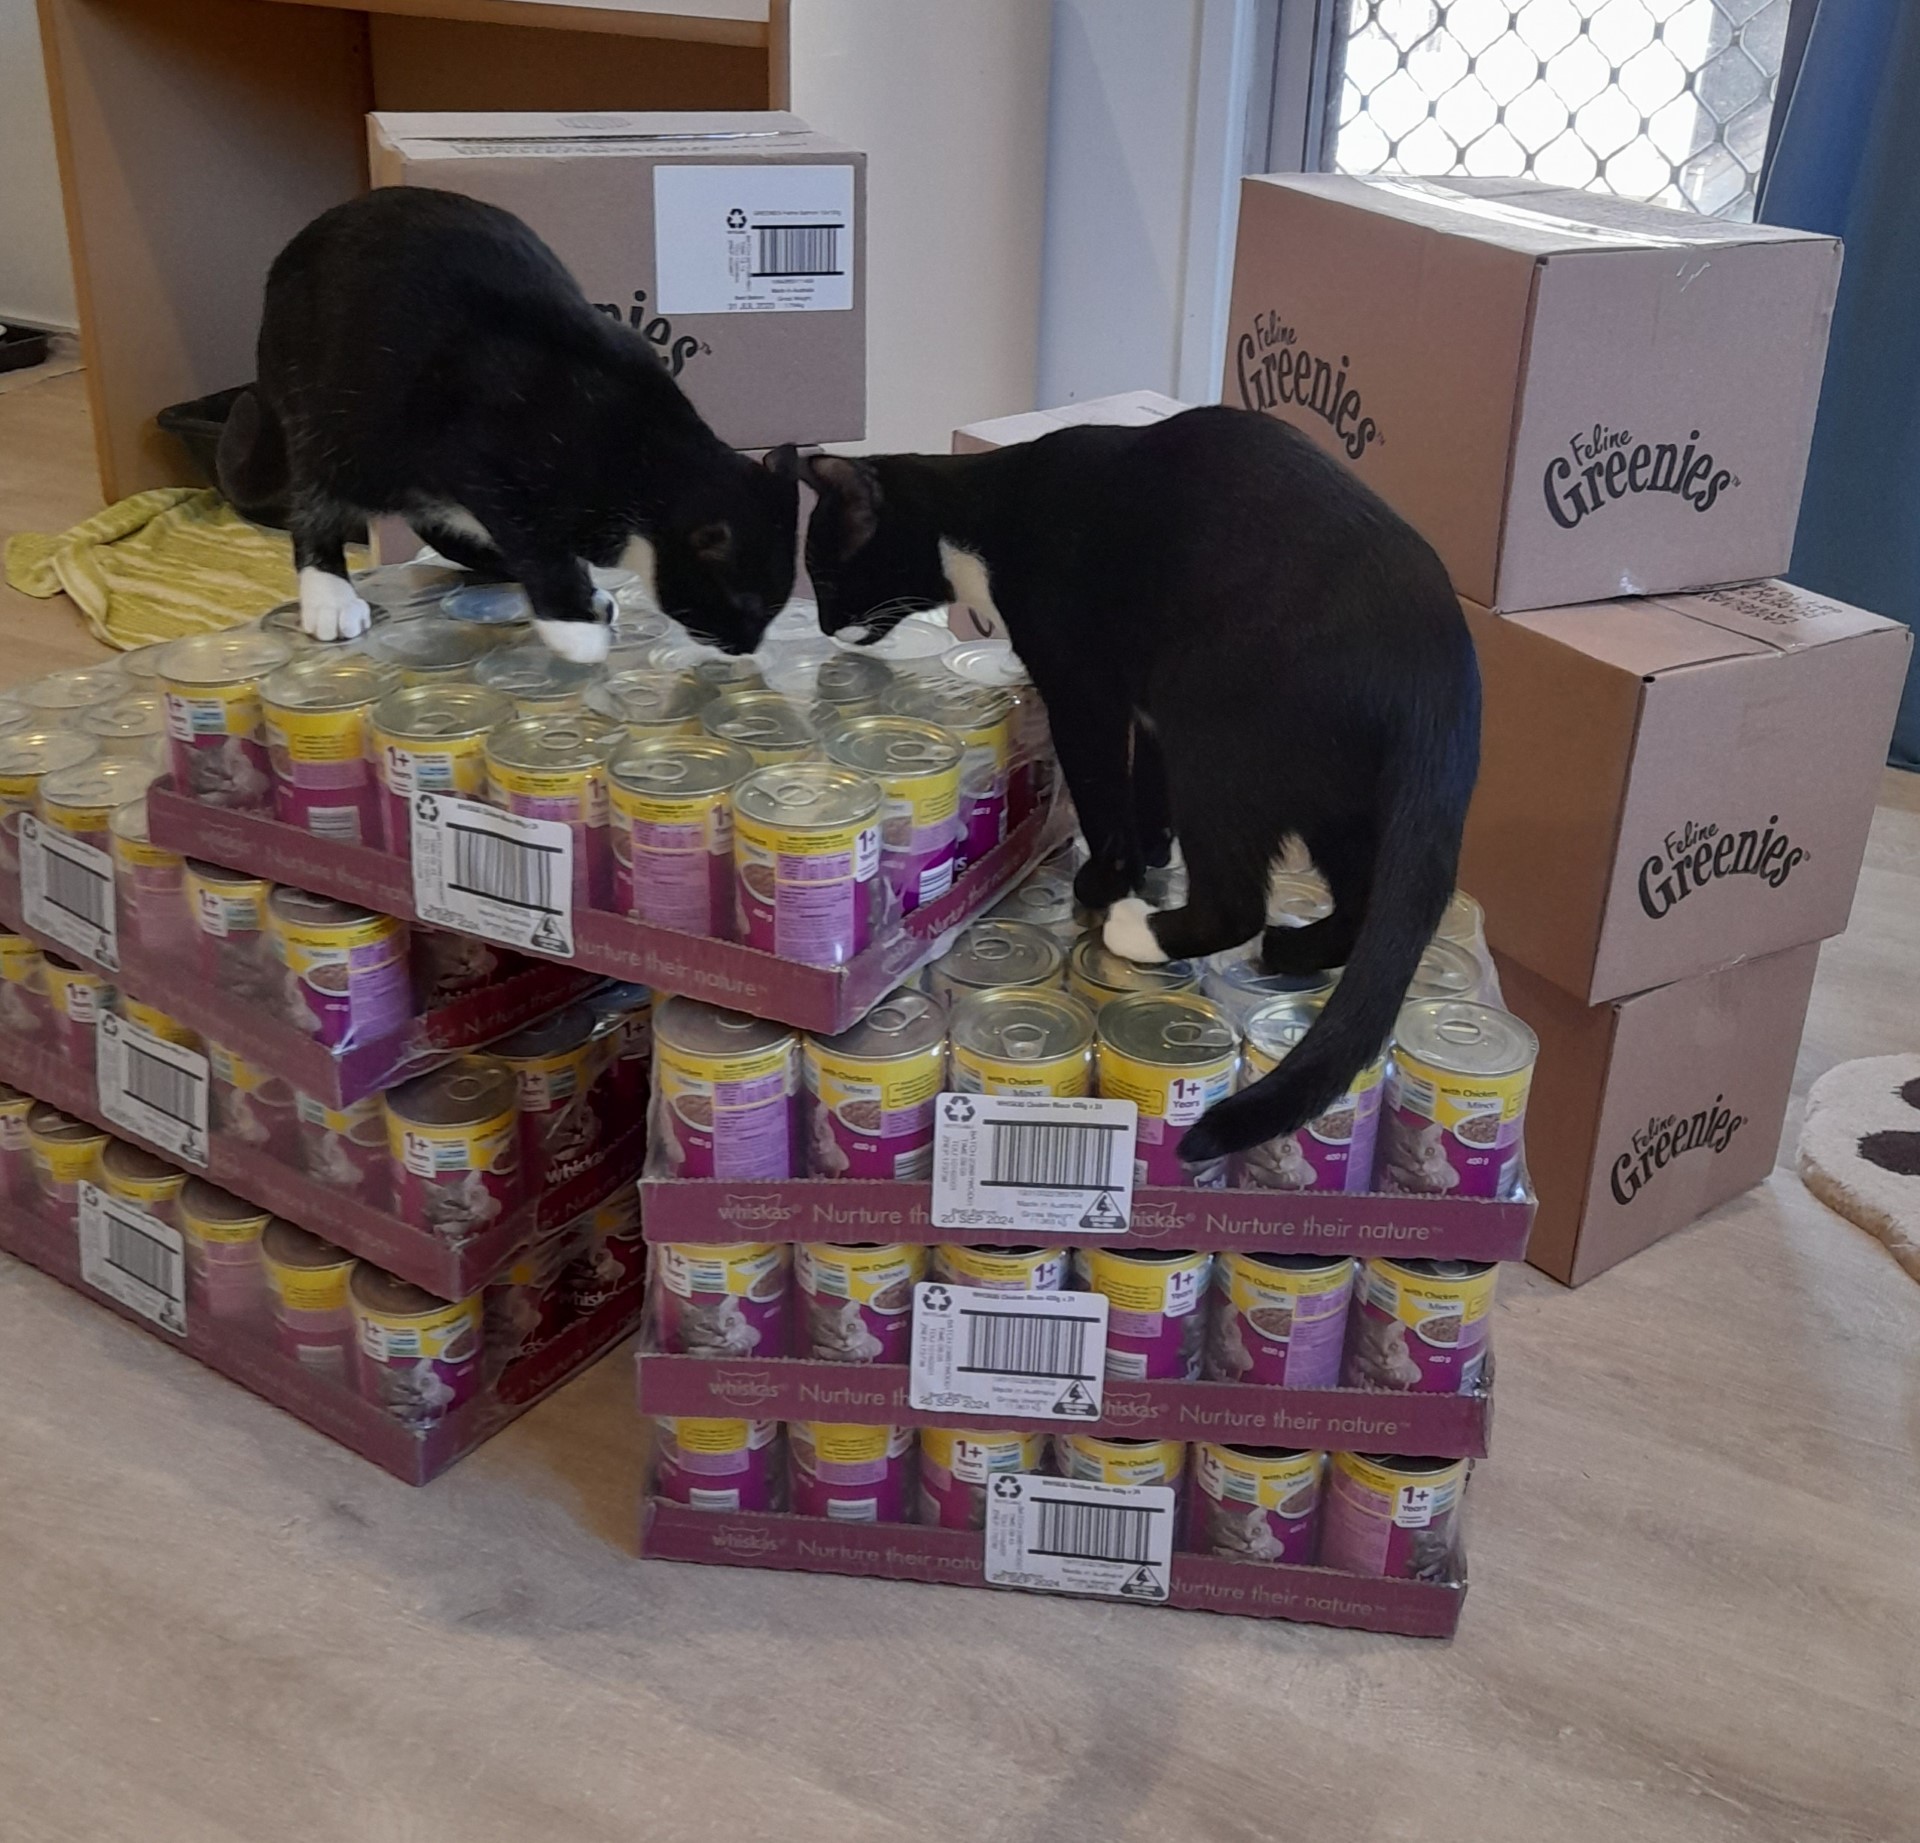 Two Black and White cats sitting on top of Whiskas cat food